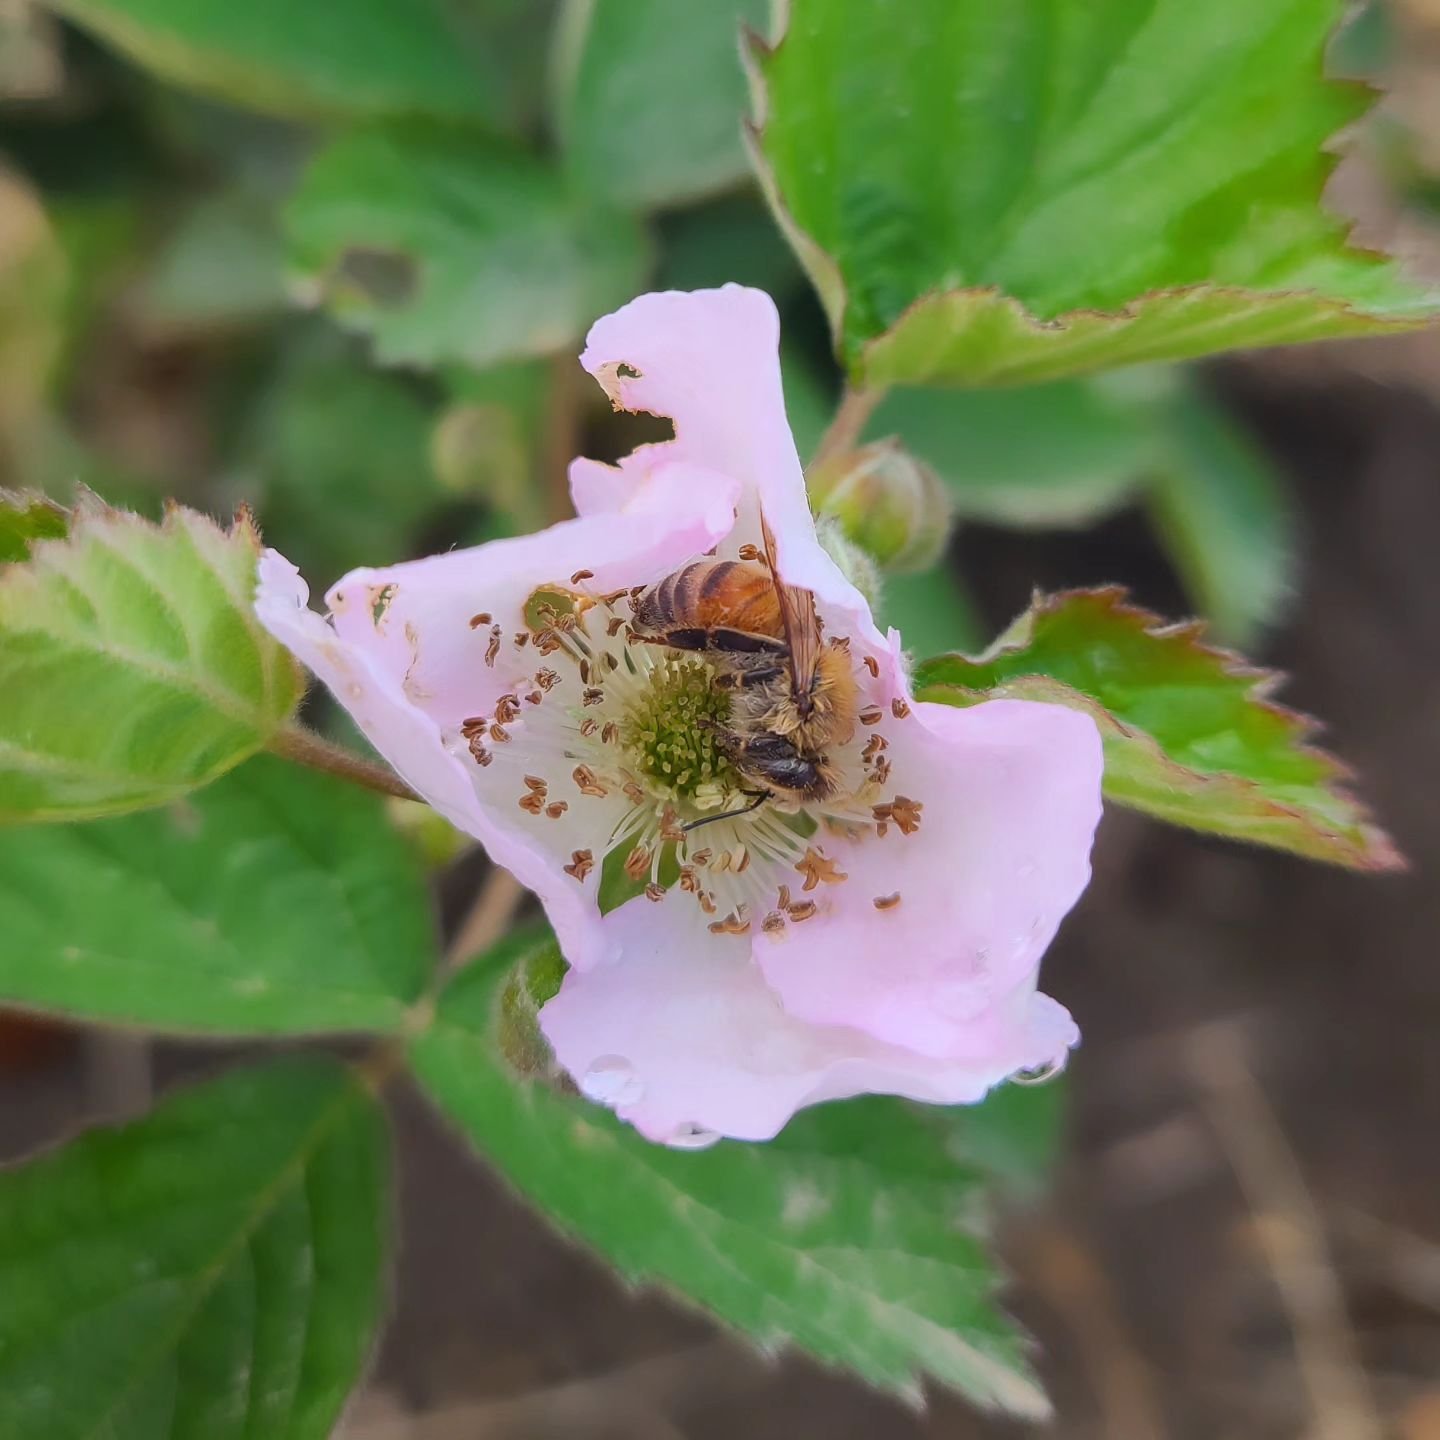 Found this bee snoozin' on a blackberry flower this morning! 

So many flowers are showing their pretty colors &amp; we are all for it! We have A LOT of flowers &amp; I predict we will have more fruit than we initially anticipated! 

All that means w